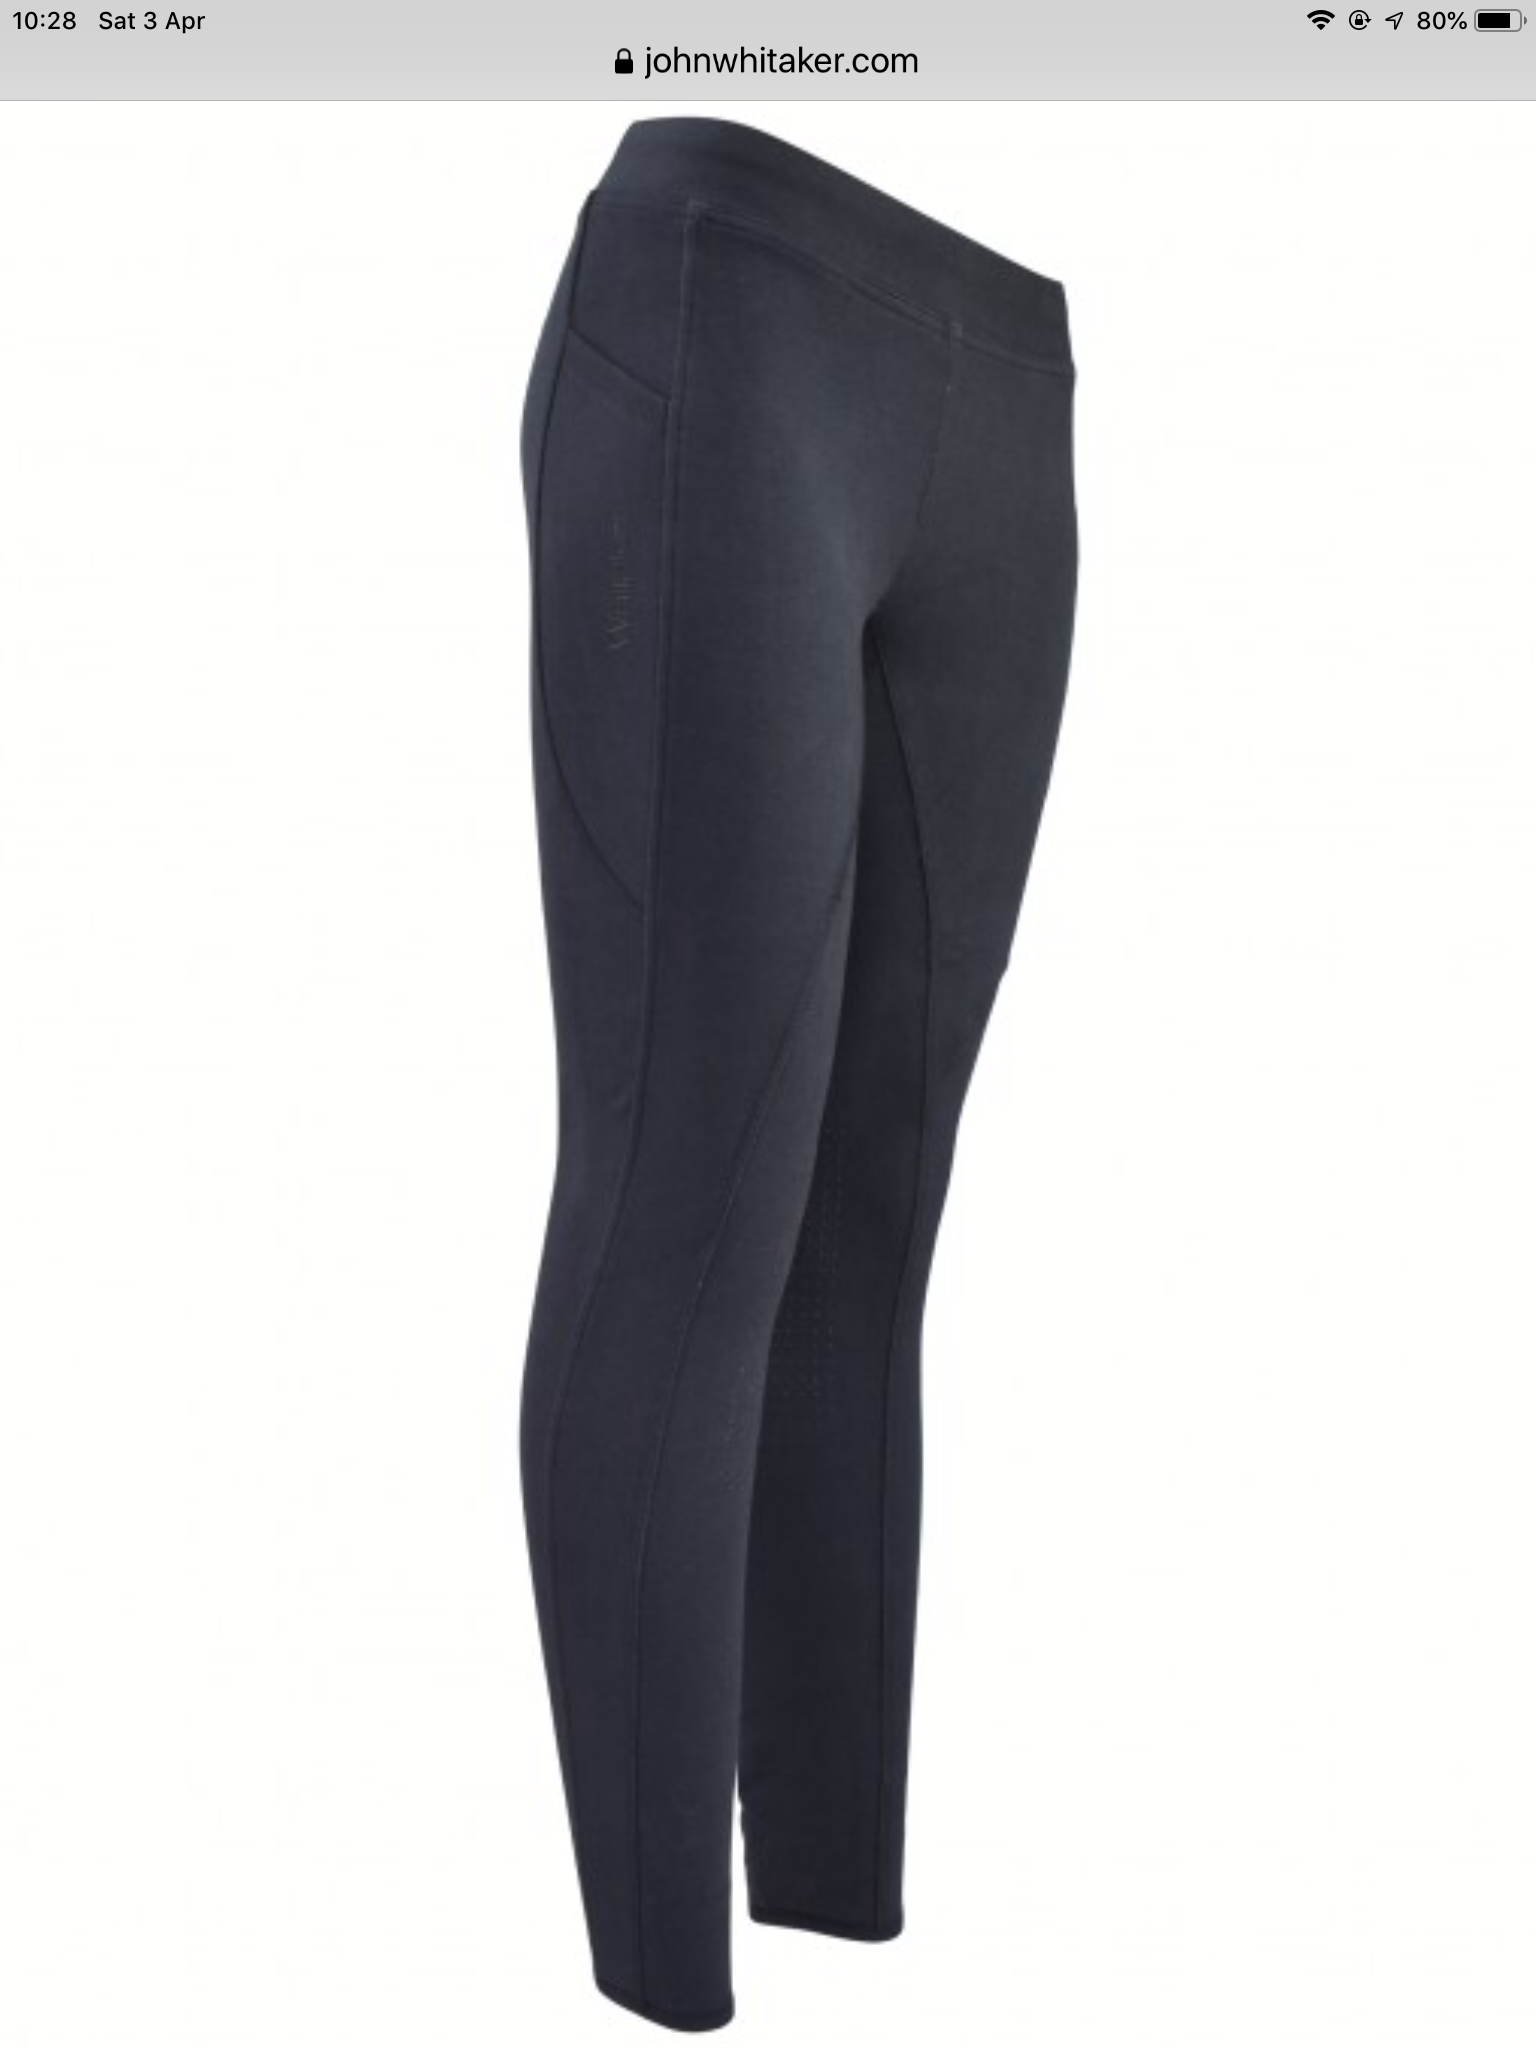 WHITAKER RIDING TIGHTS NAVY SILICONE KNEE & PHONE POCKET